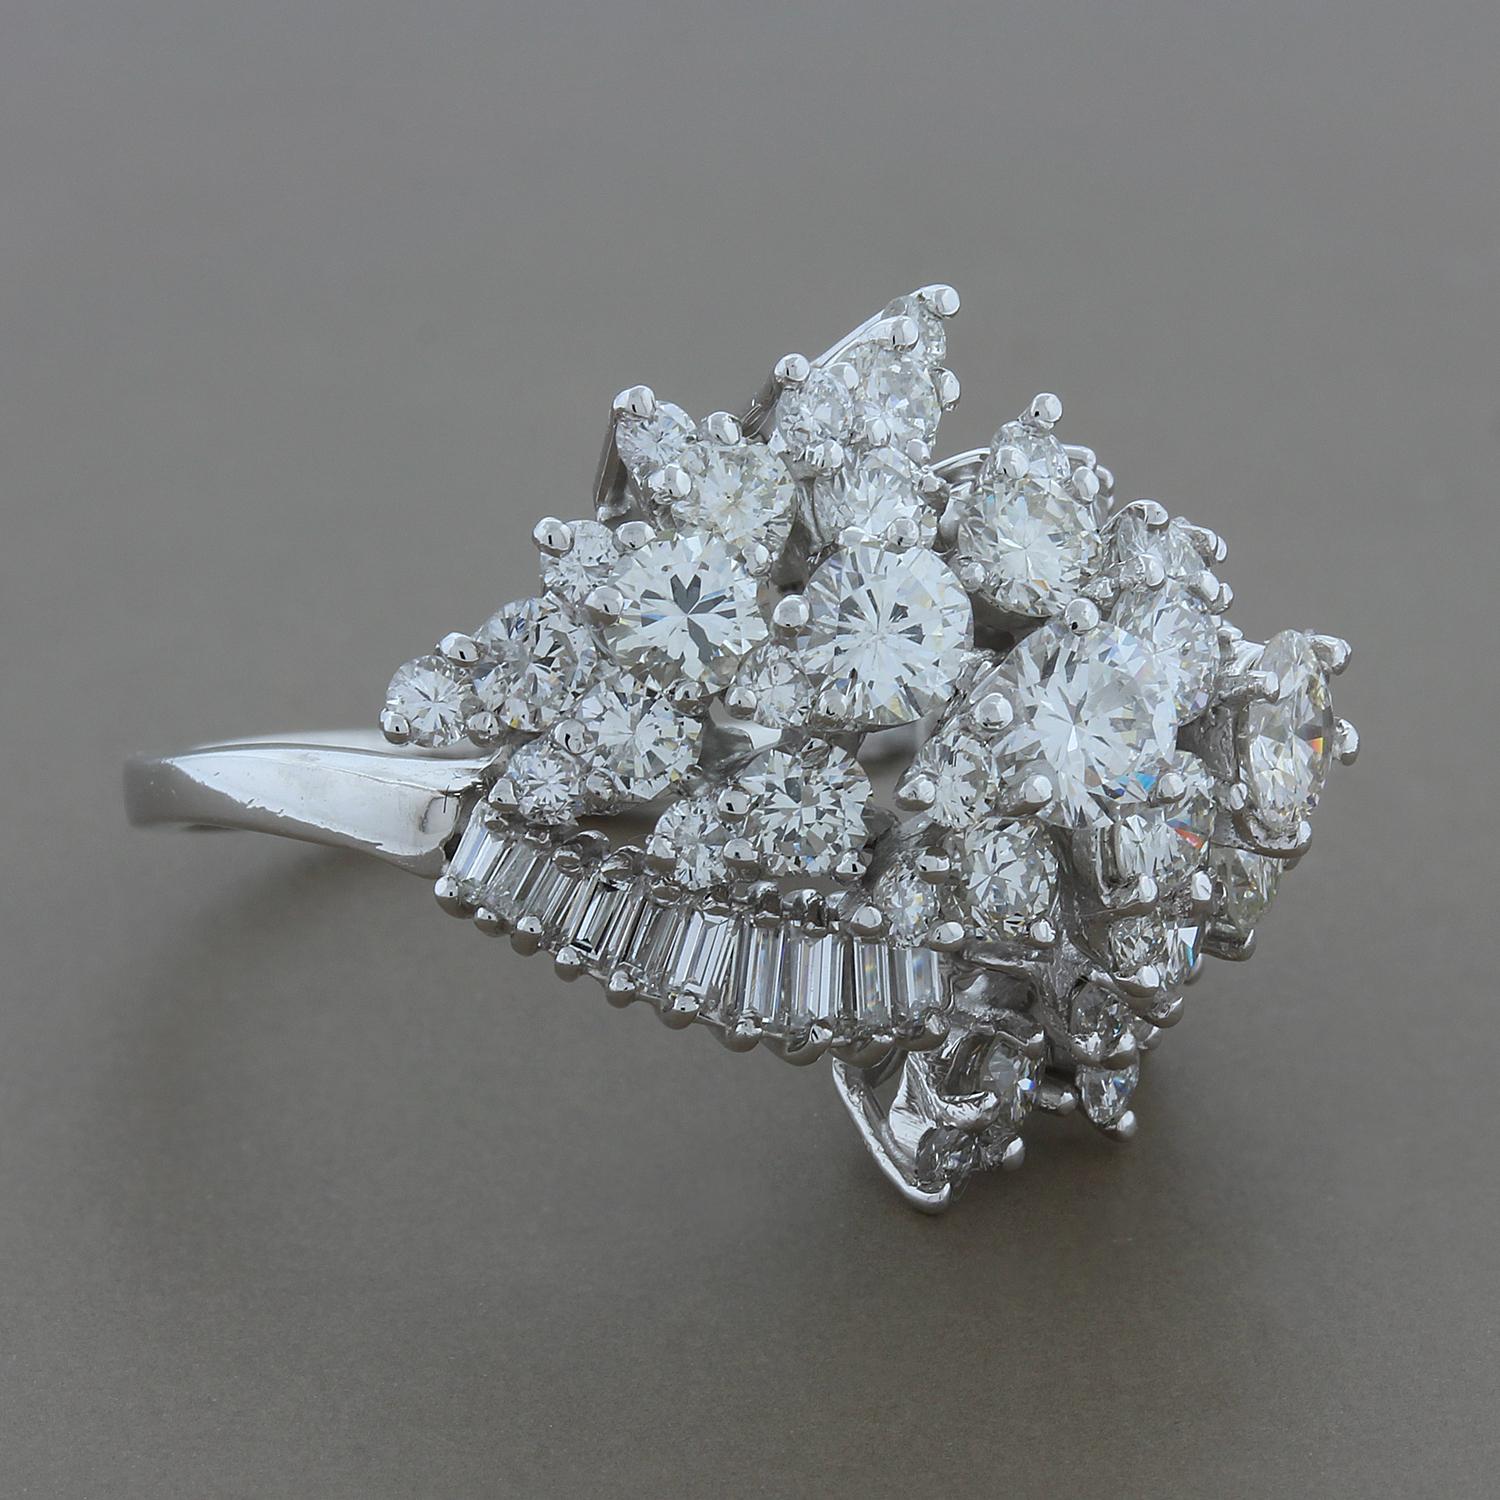 Indulge yourself in this perfectly domed cluster ring featuring 3.26 carats of sparkling white VS quality diamonds. The round cut and baguette cut diamonds are all set in platinum for a spectacular finish in this masterfully crafted ring.

Currently